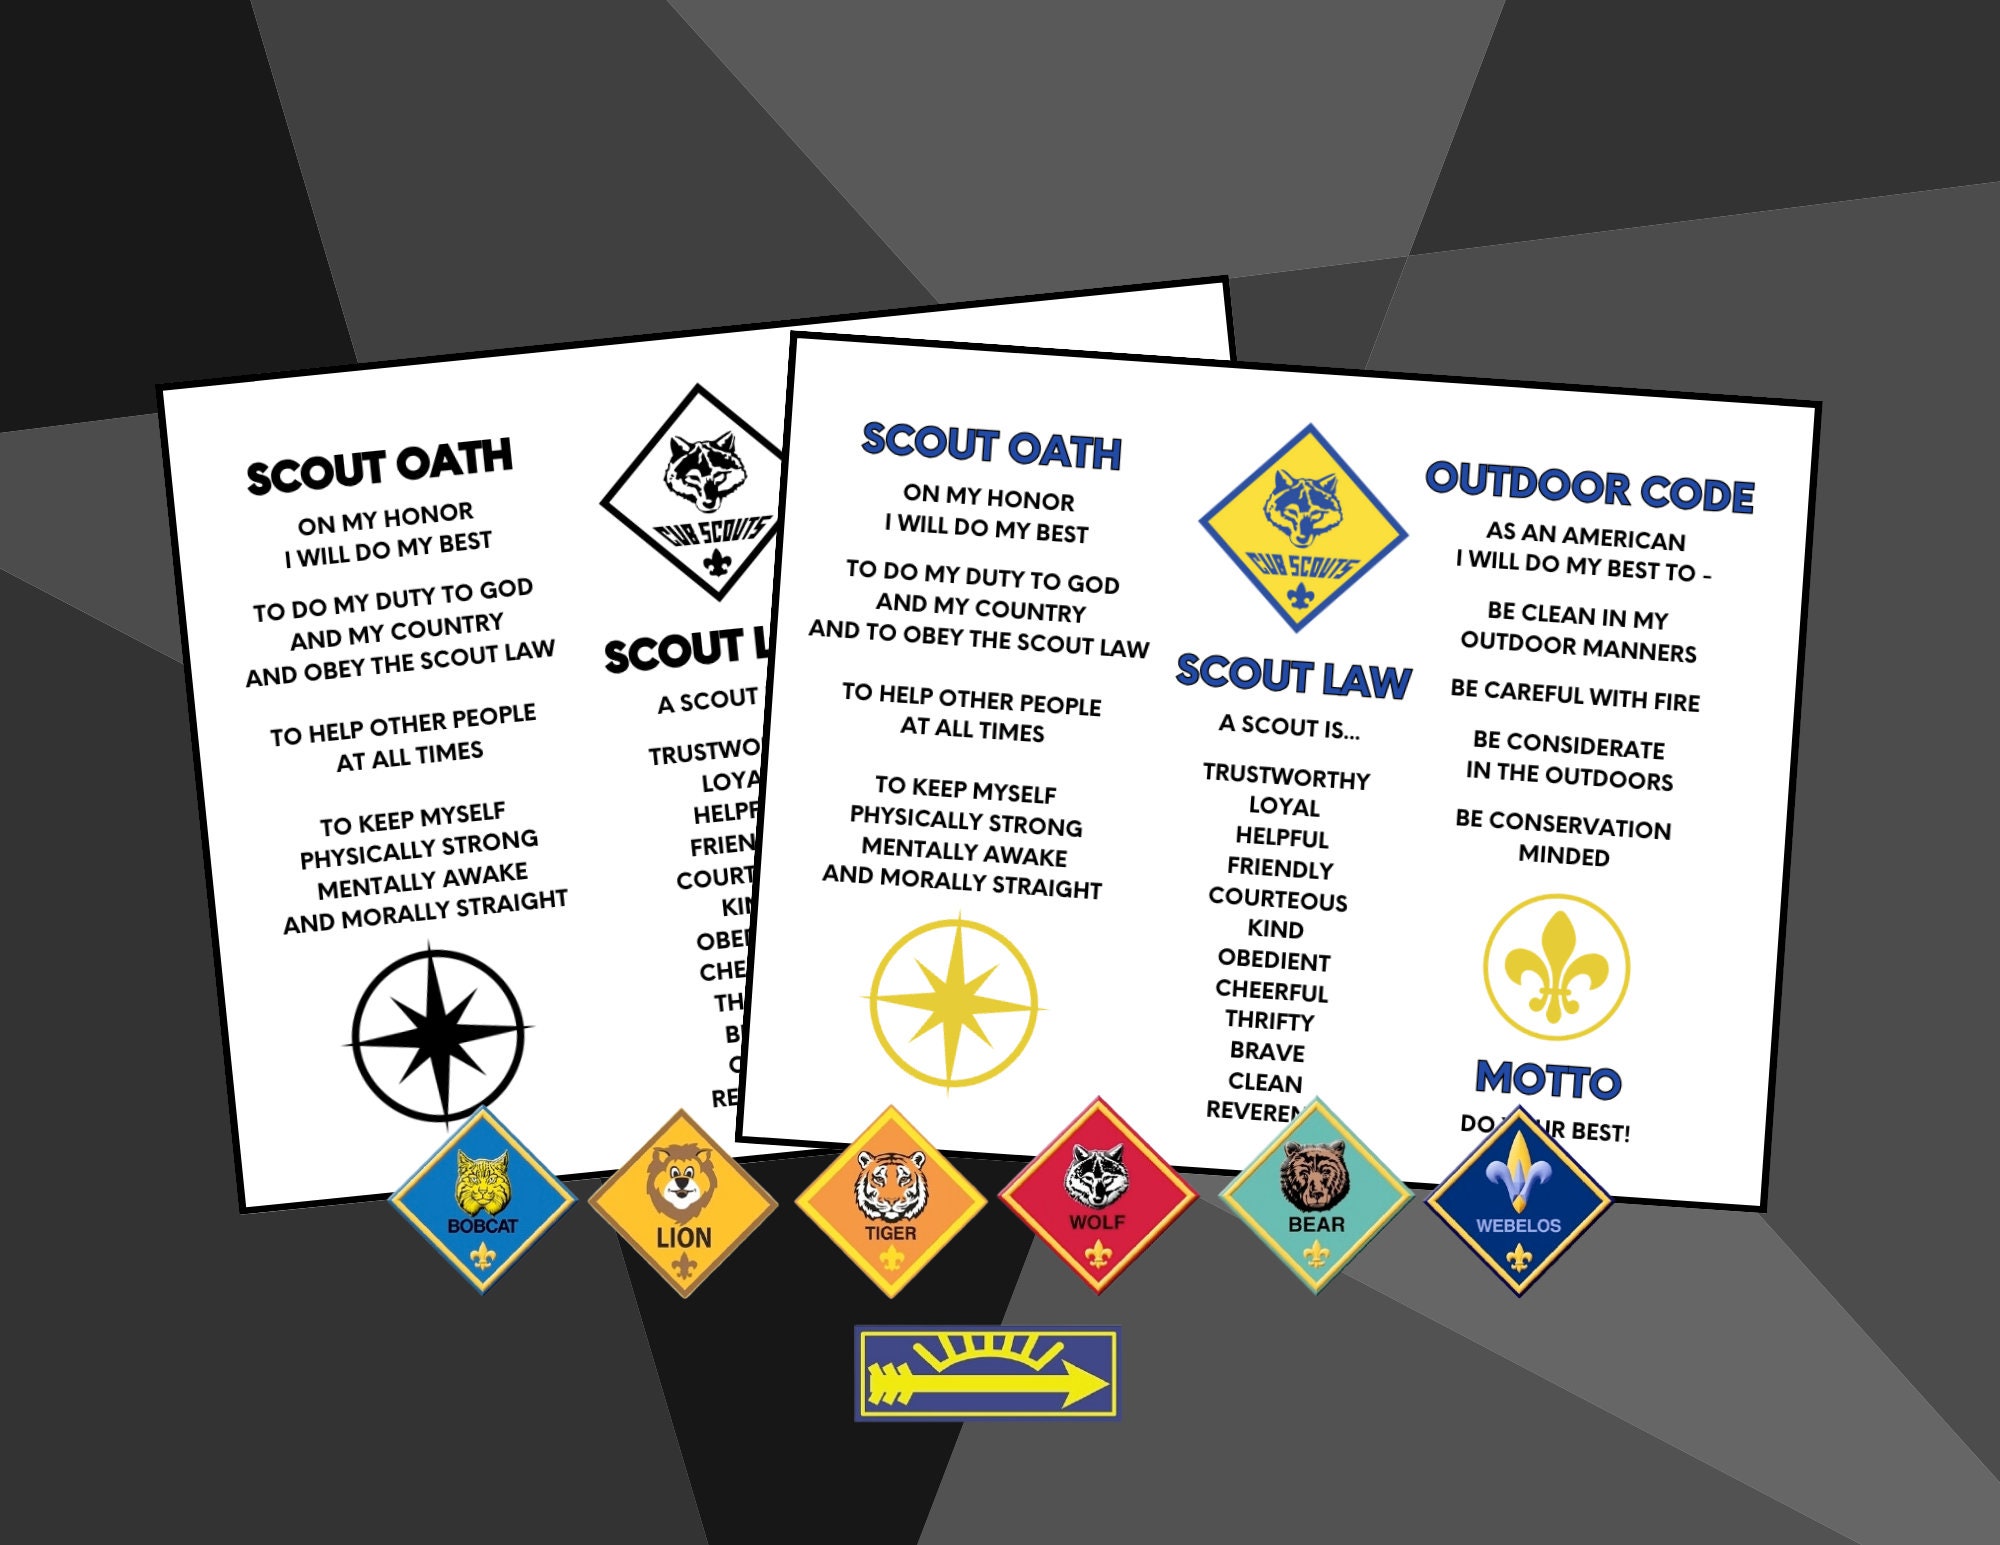 Not All Boy Scouts Start Out as Cub Scouts - Triad Moms on Main